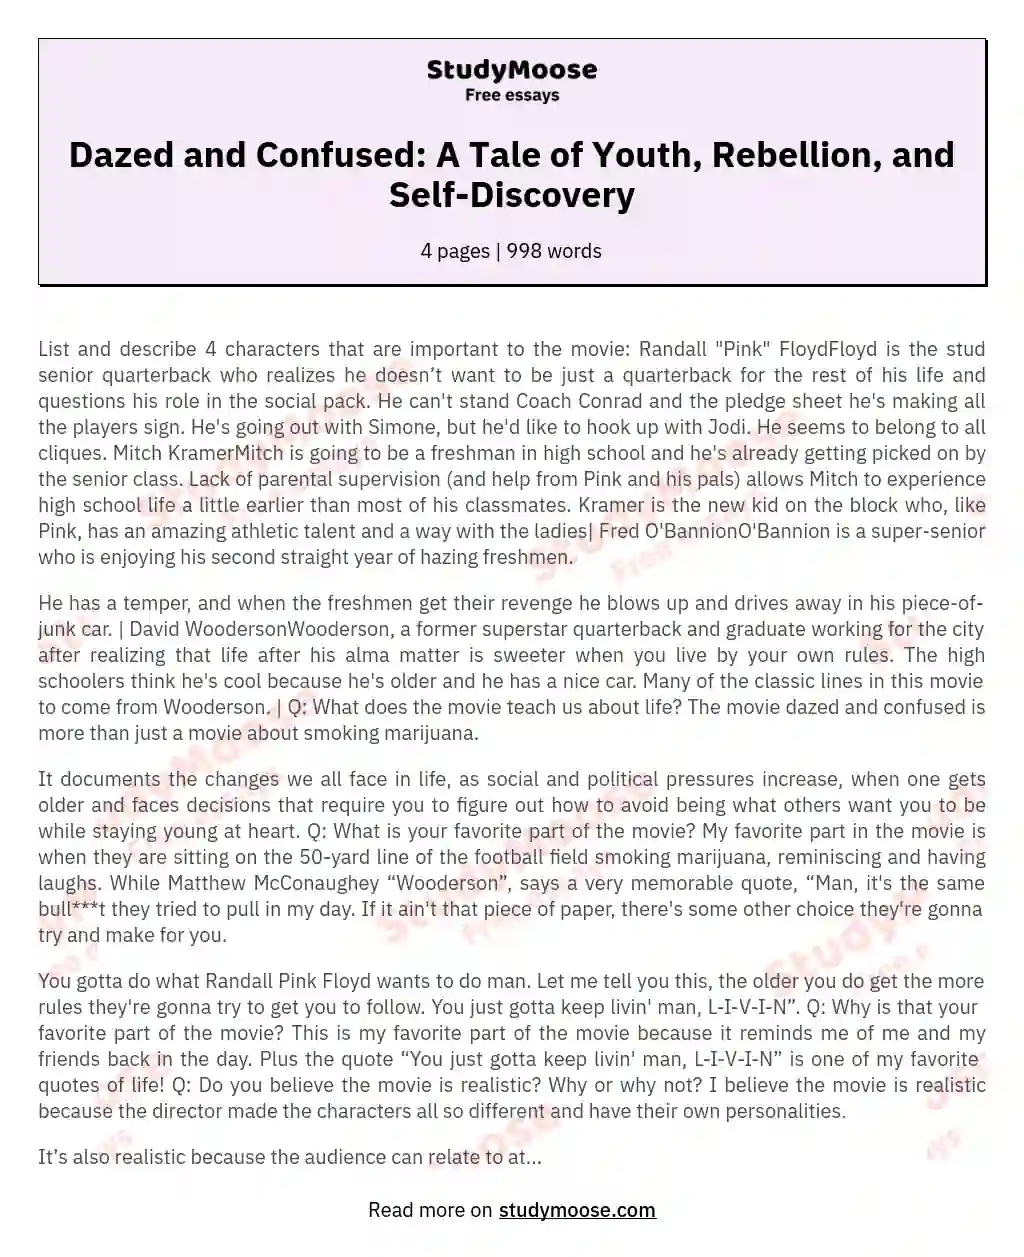 Dazed and Confused: A Tale of Youth, Rebellion, and Self-Discovery essay